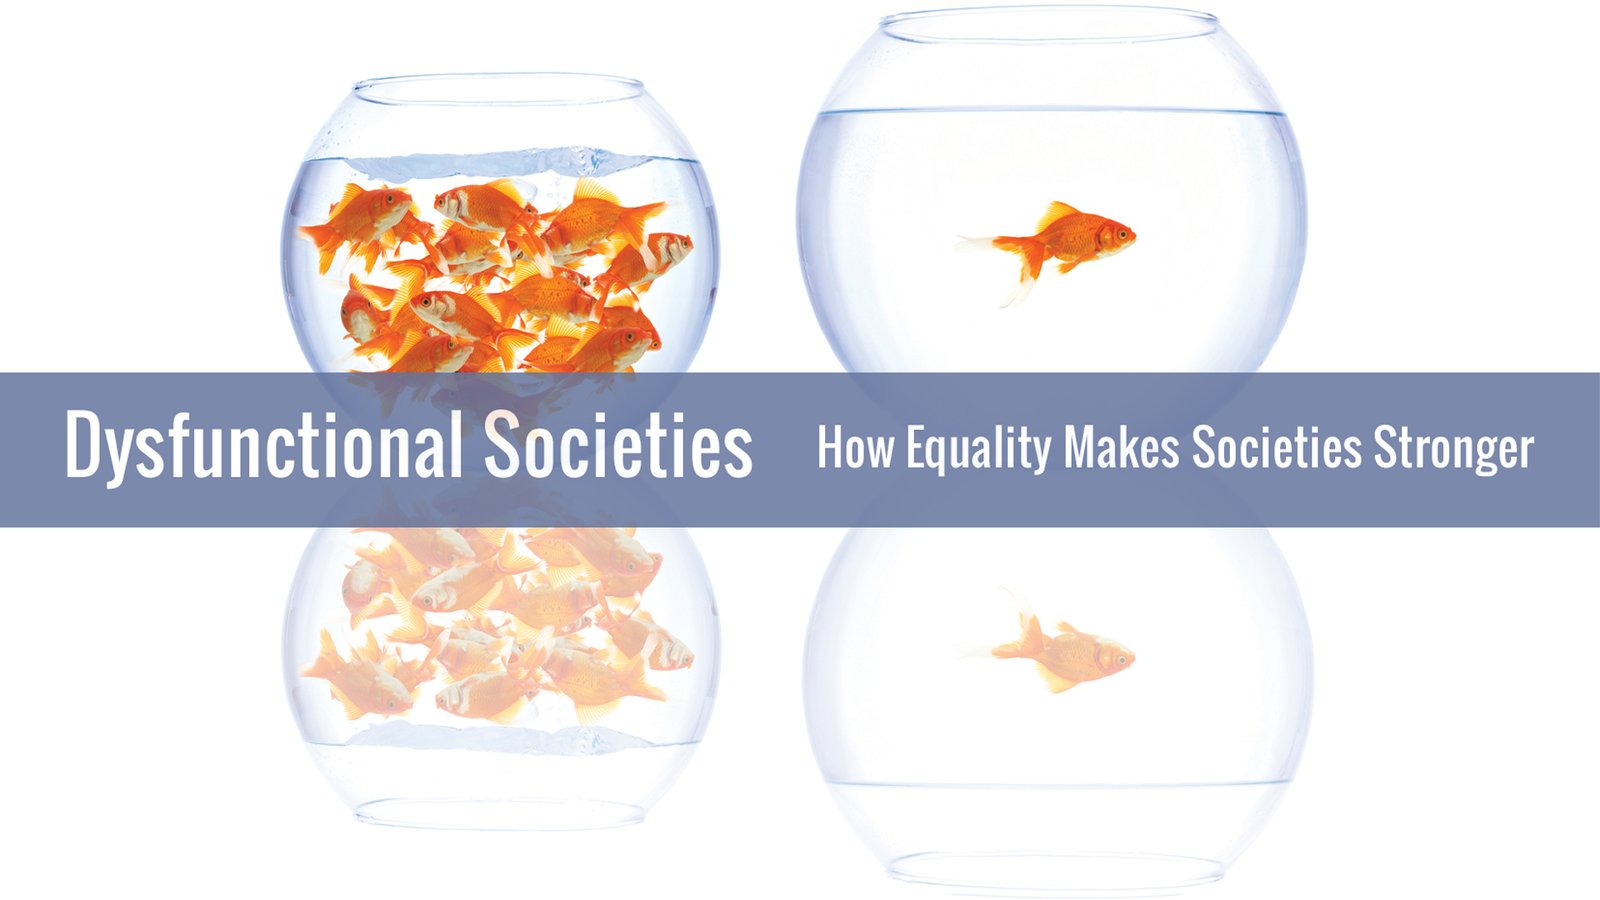 Dysfunctional Societies - How Equality Makes Societies Stronger